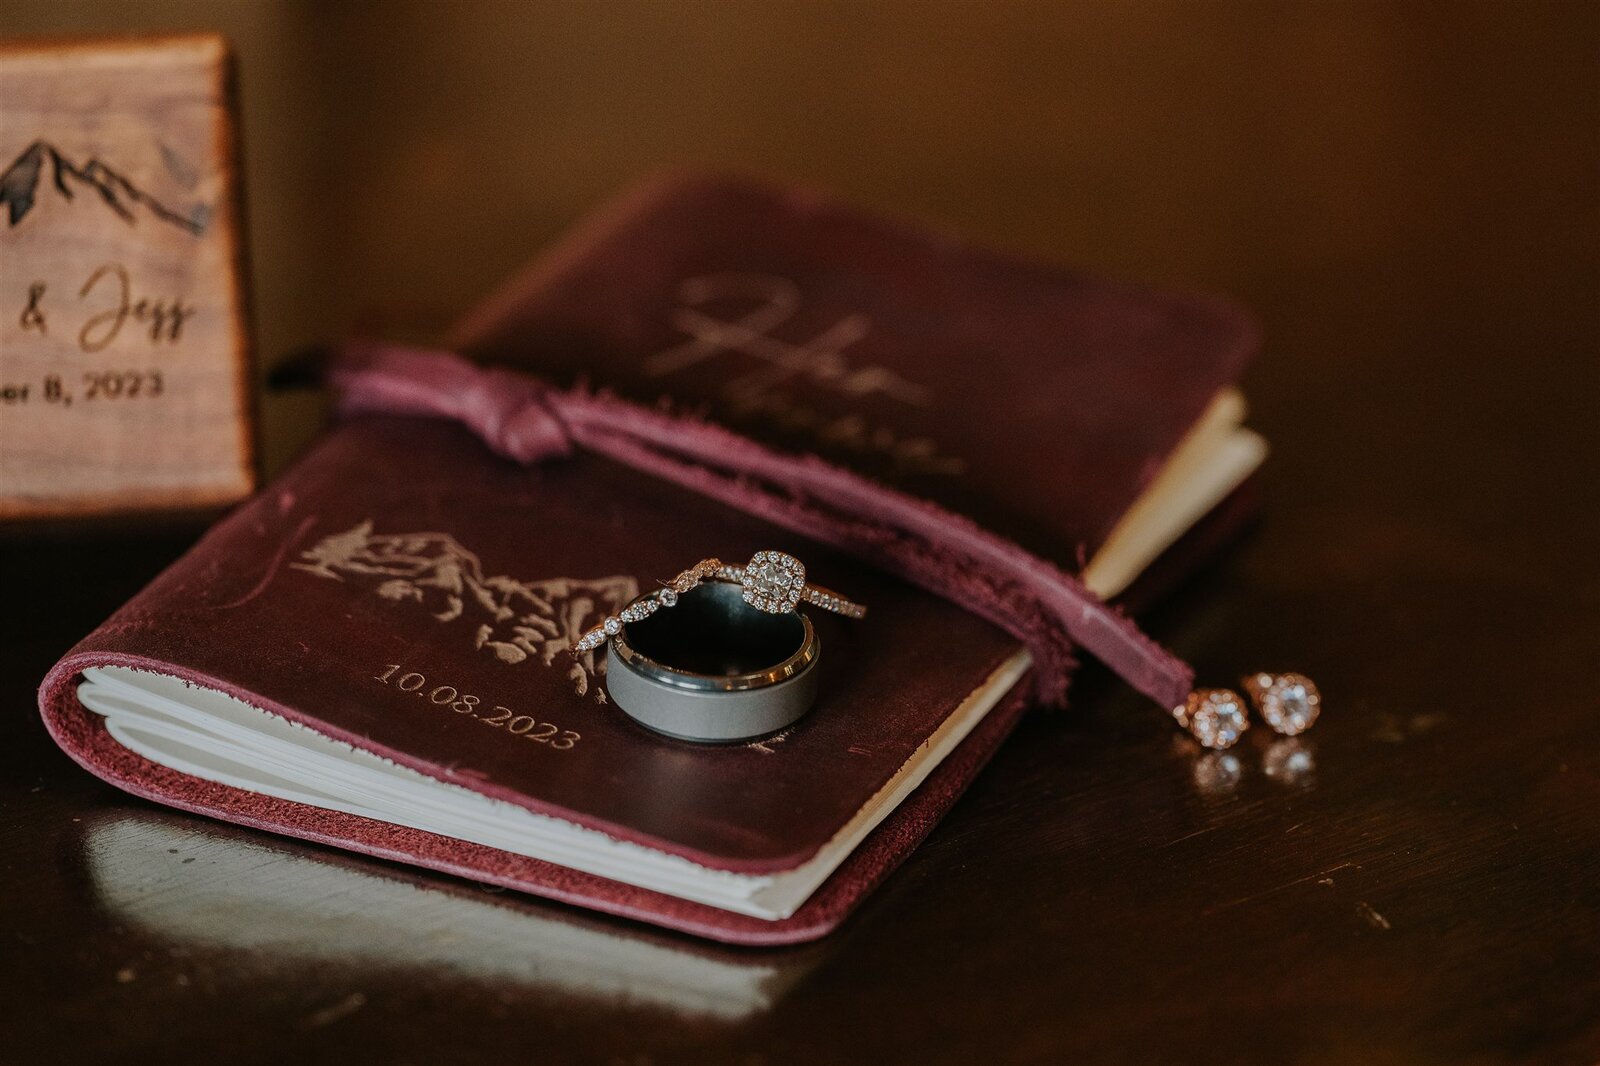 vow-book-ring-red